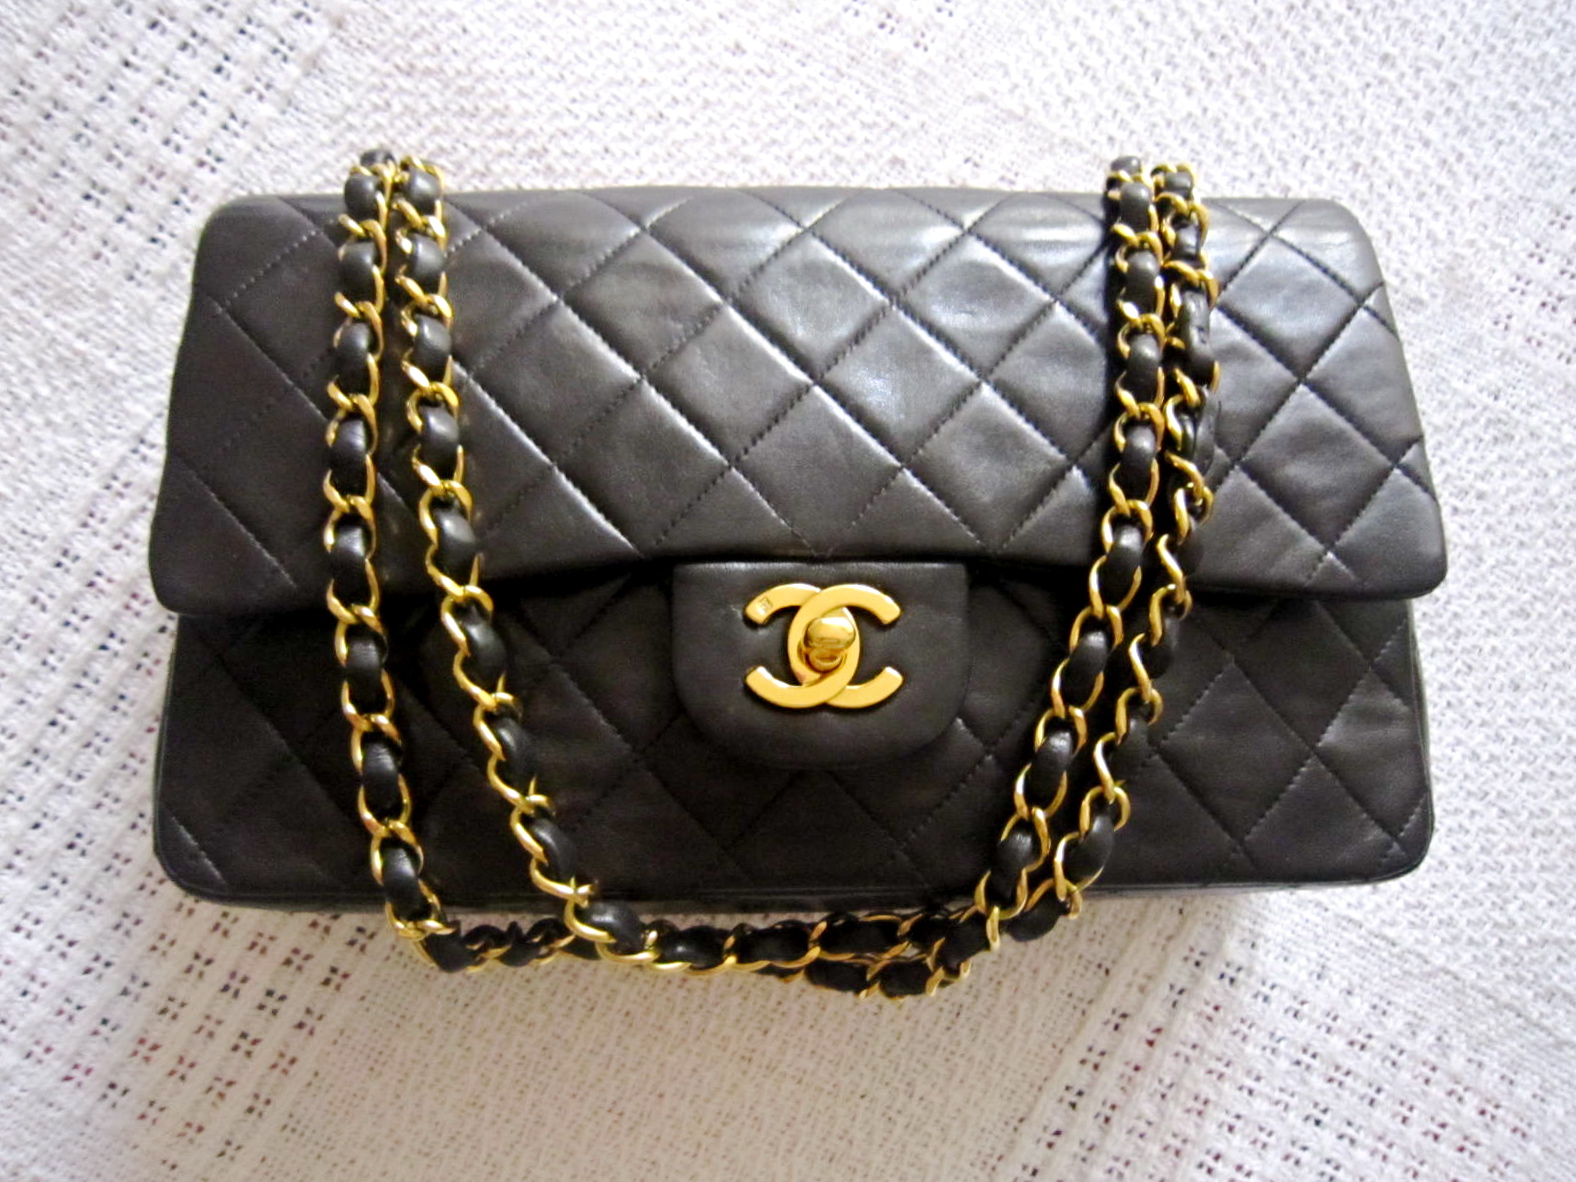 Chanel Silver Lambskin Jumbo 2.55 Quilted Classic Flap Bag